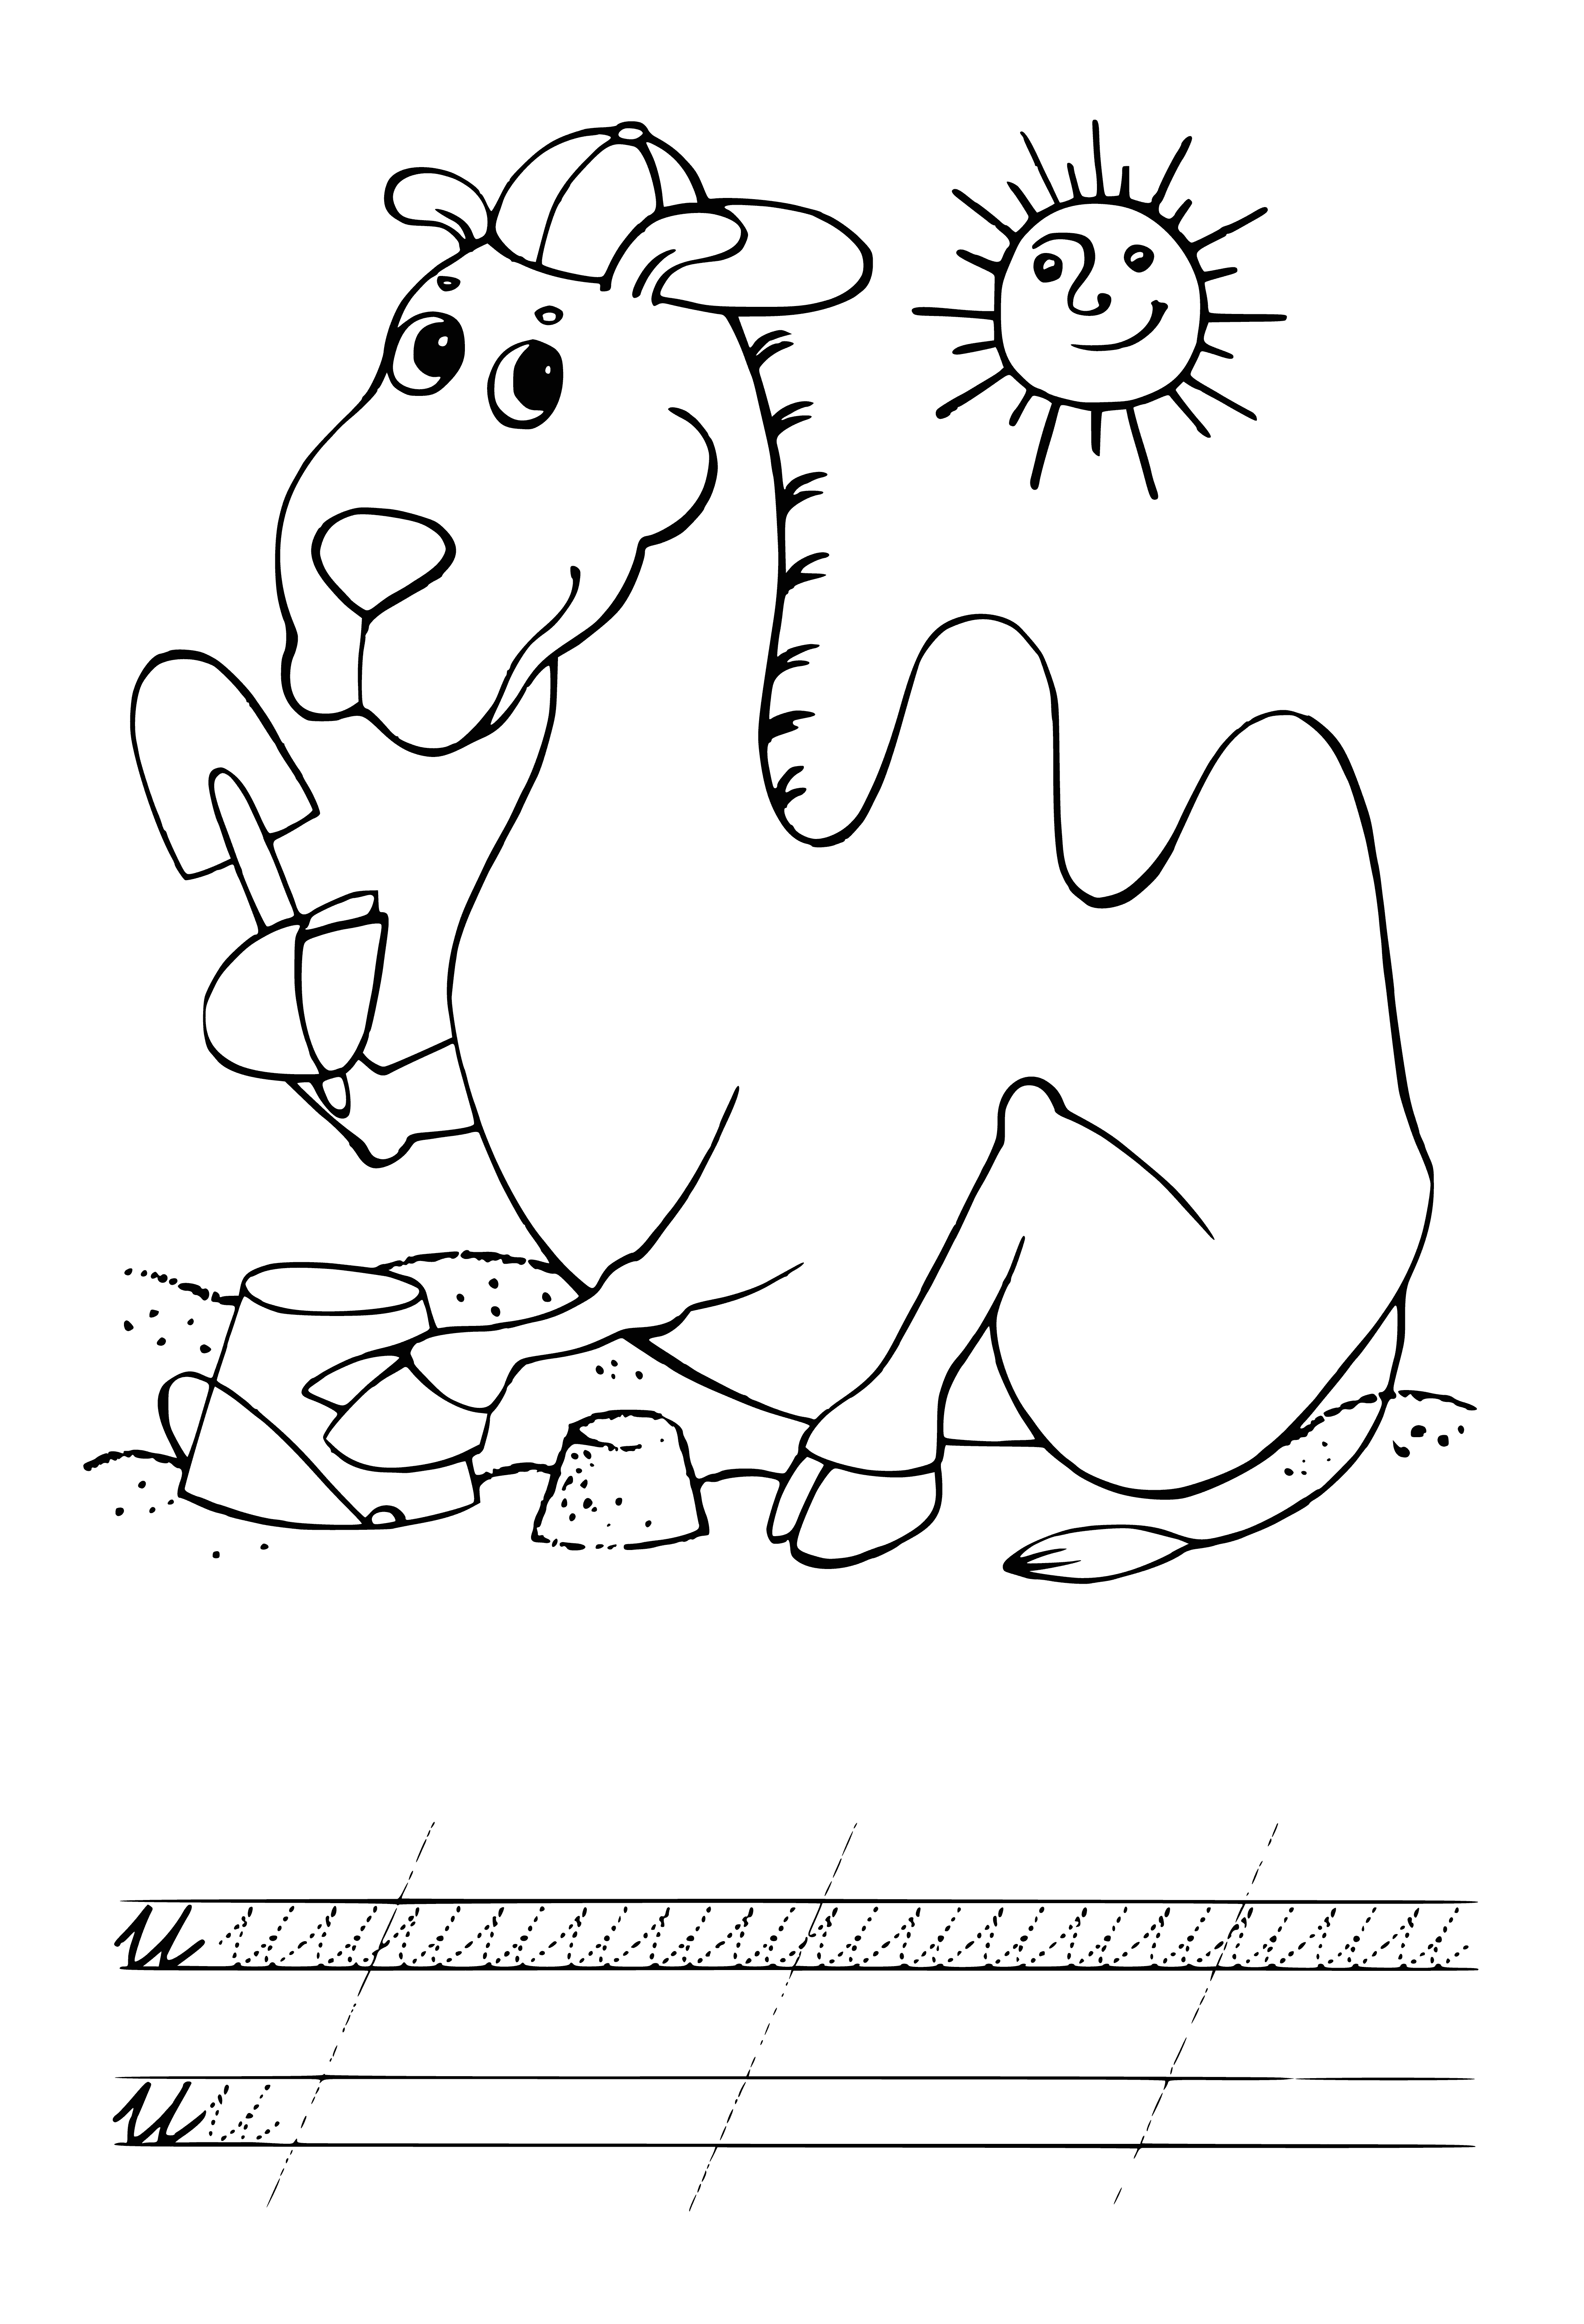 coloring page: Camels are large four-legged animals with a long neck and humpback that live in hot desert climates. They are used for riding and transporting goods.